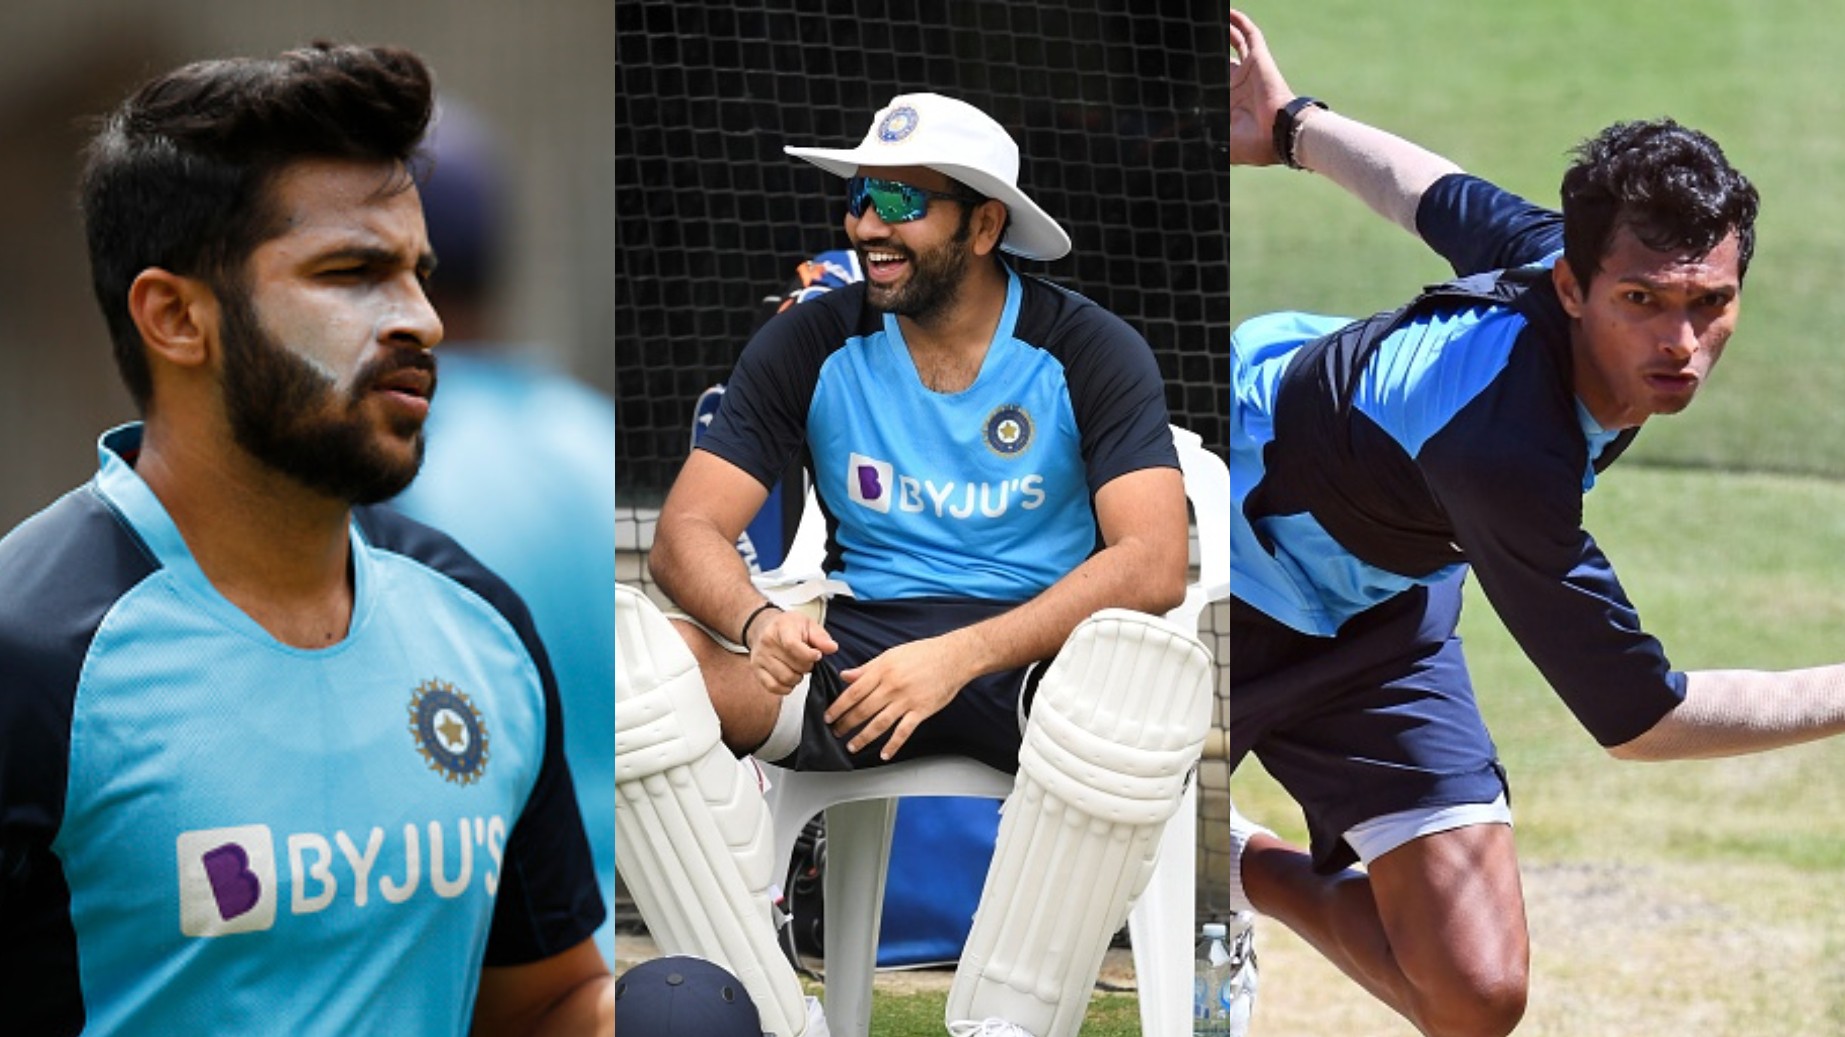 AUS v IND 2020-21: Rohit may replace Mayank in playing XI; Shardul or Saini big question for SCG Test, reports